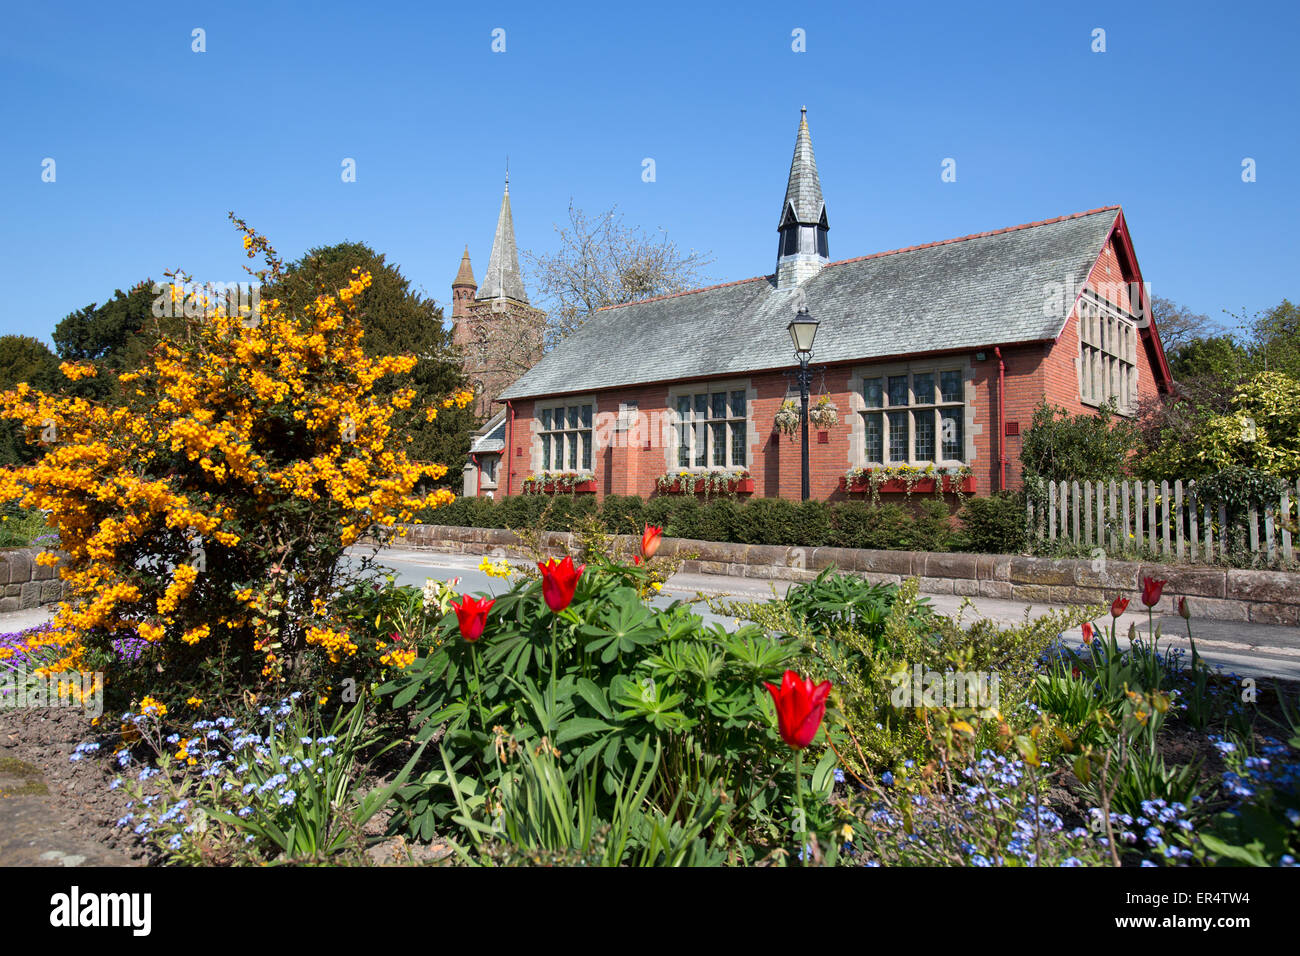 Village of Aldford, England. Picturesque spring view of Aldford Village Hall in Church Lane. Stock Photo